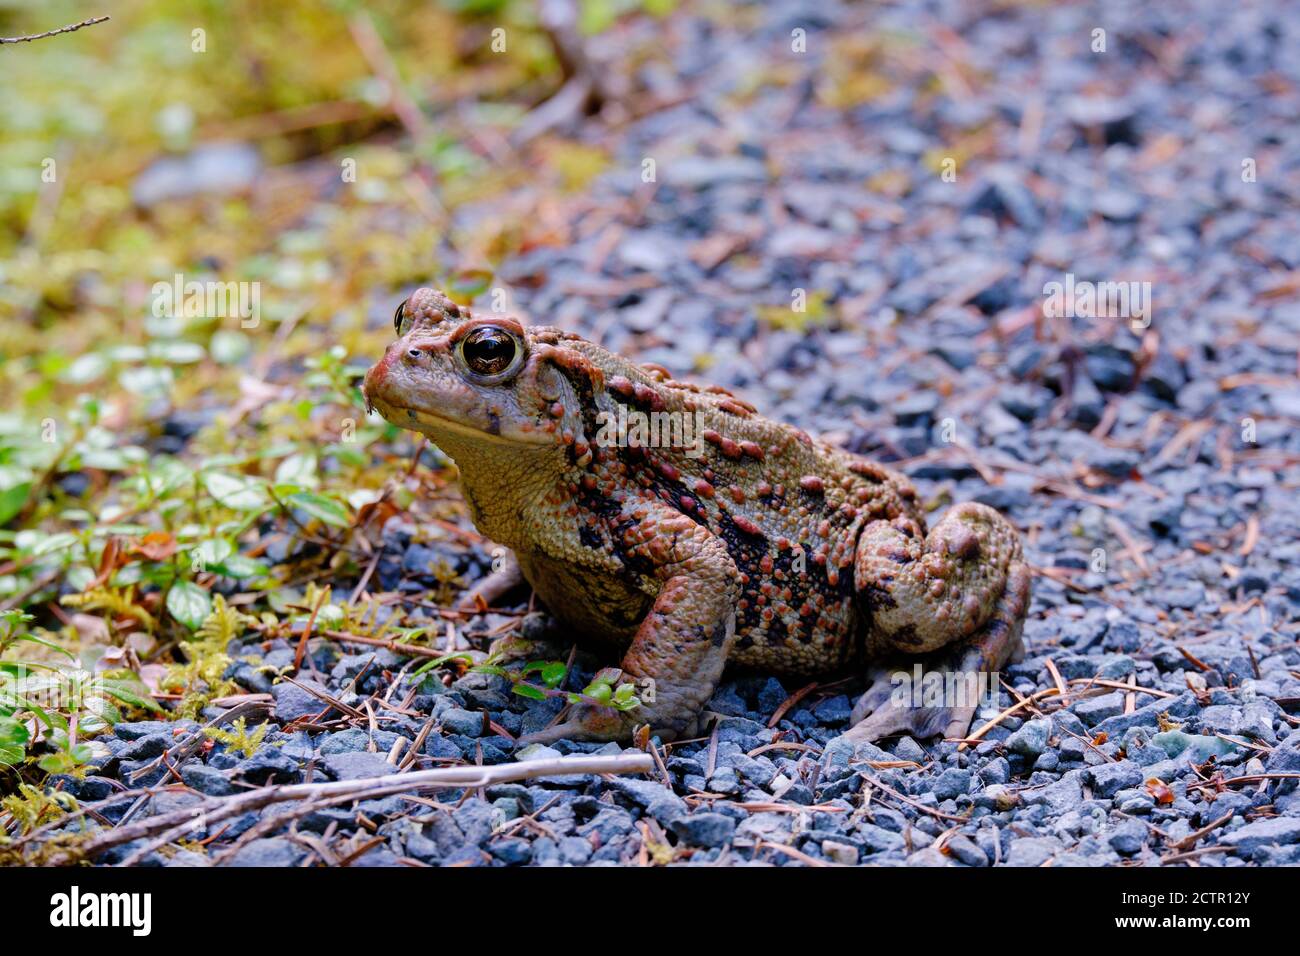 Beauty is in the eye...  Adult toad sits patiently on path of small stones with their mottled and blotchy skin shown in close-up detail. Stock Photo